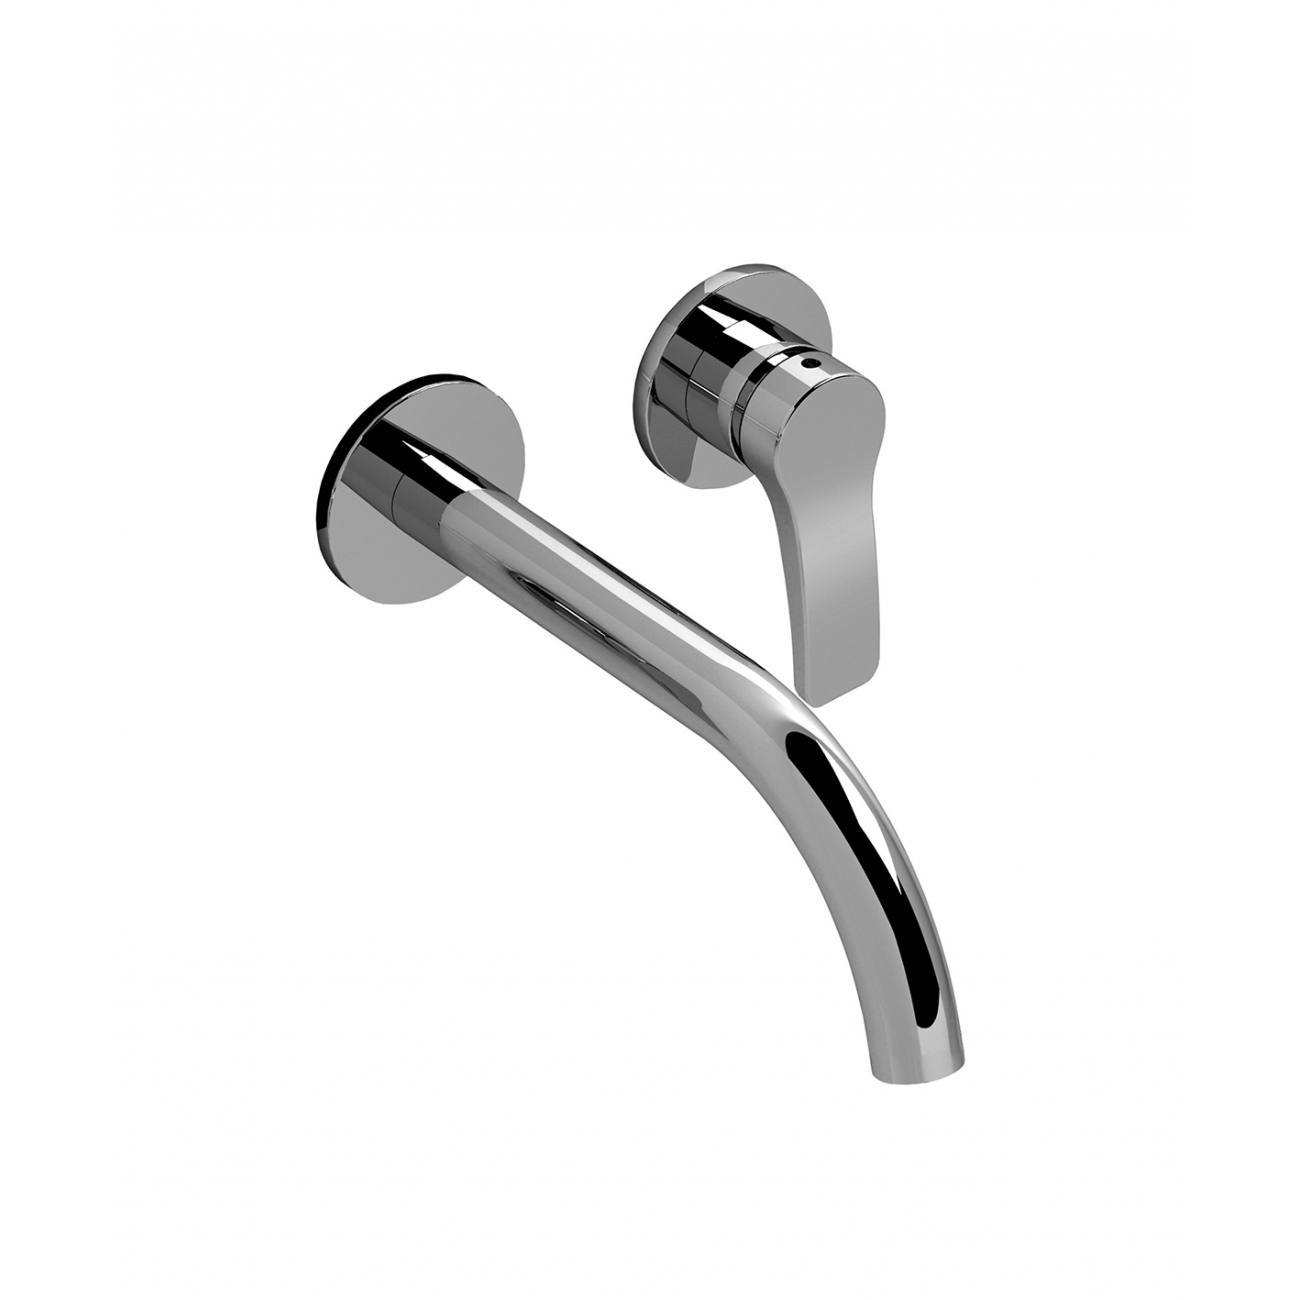 FANTINI ABOUTWATER AL/23 WALL MOUNT BASIN MIXER